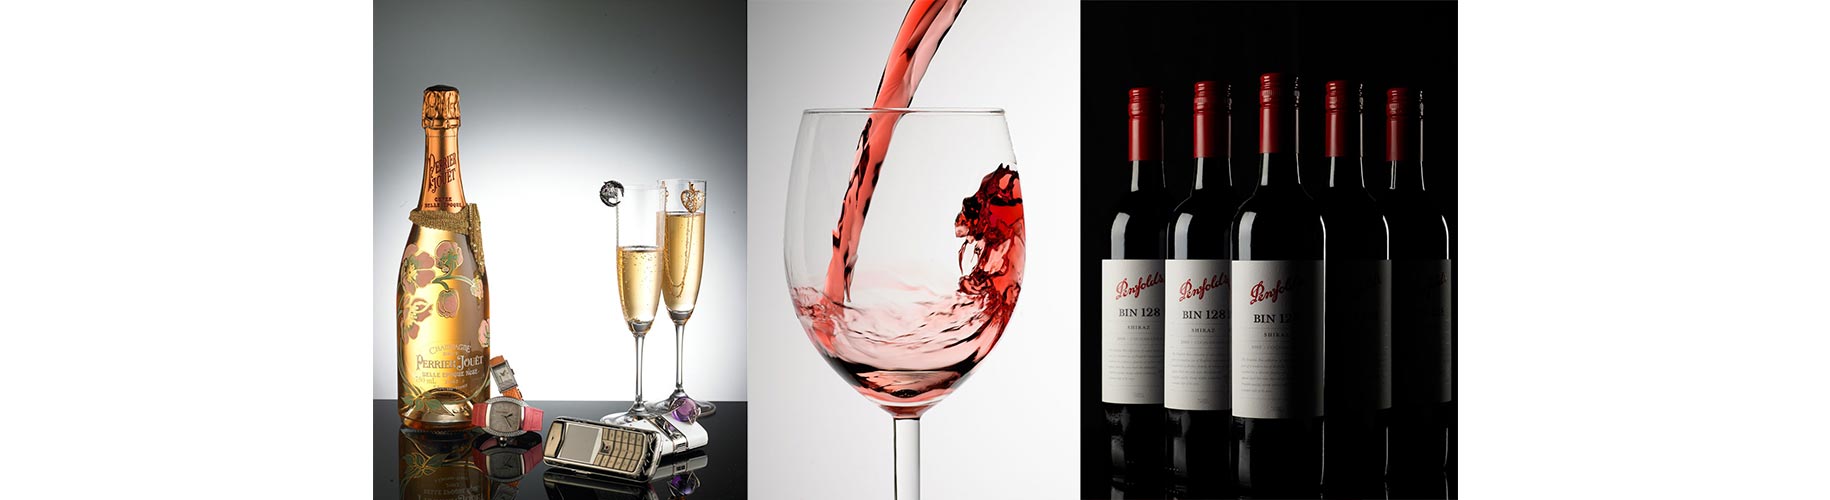 wine, wine glass, and wine bottles photography